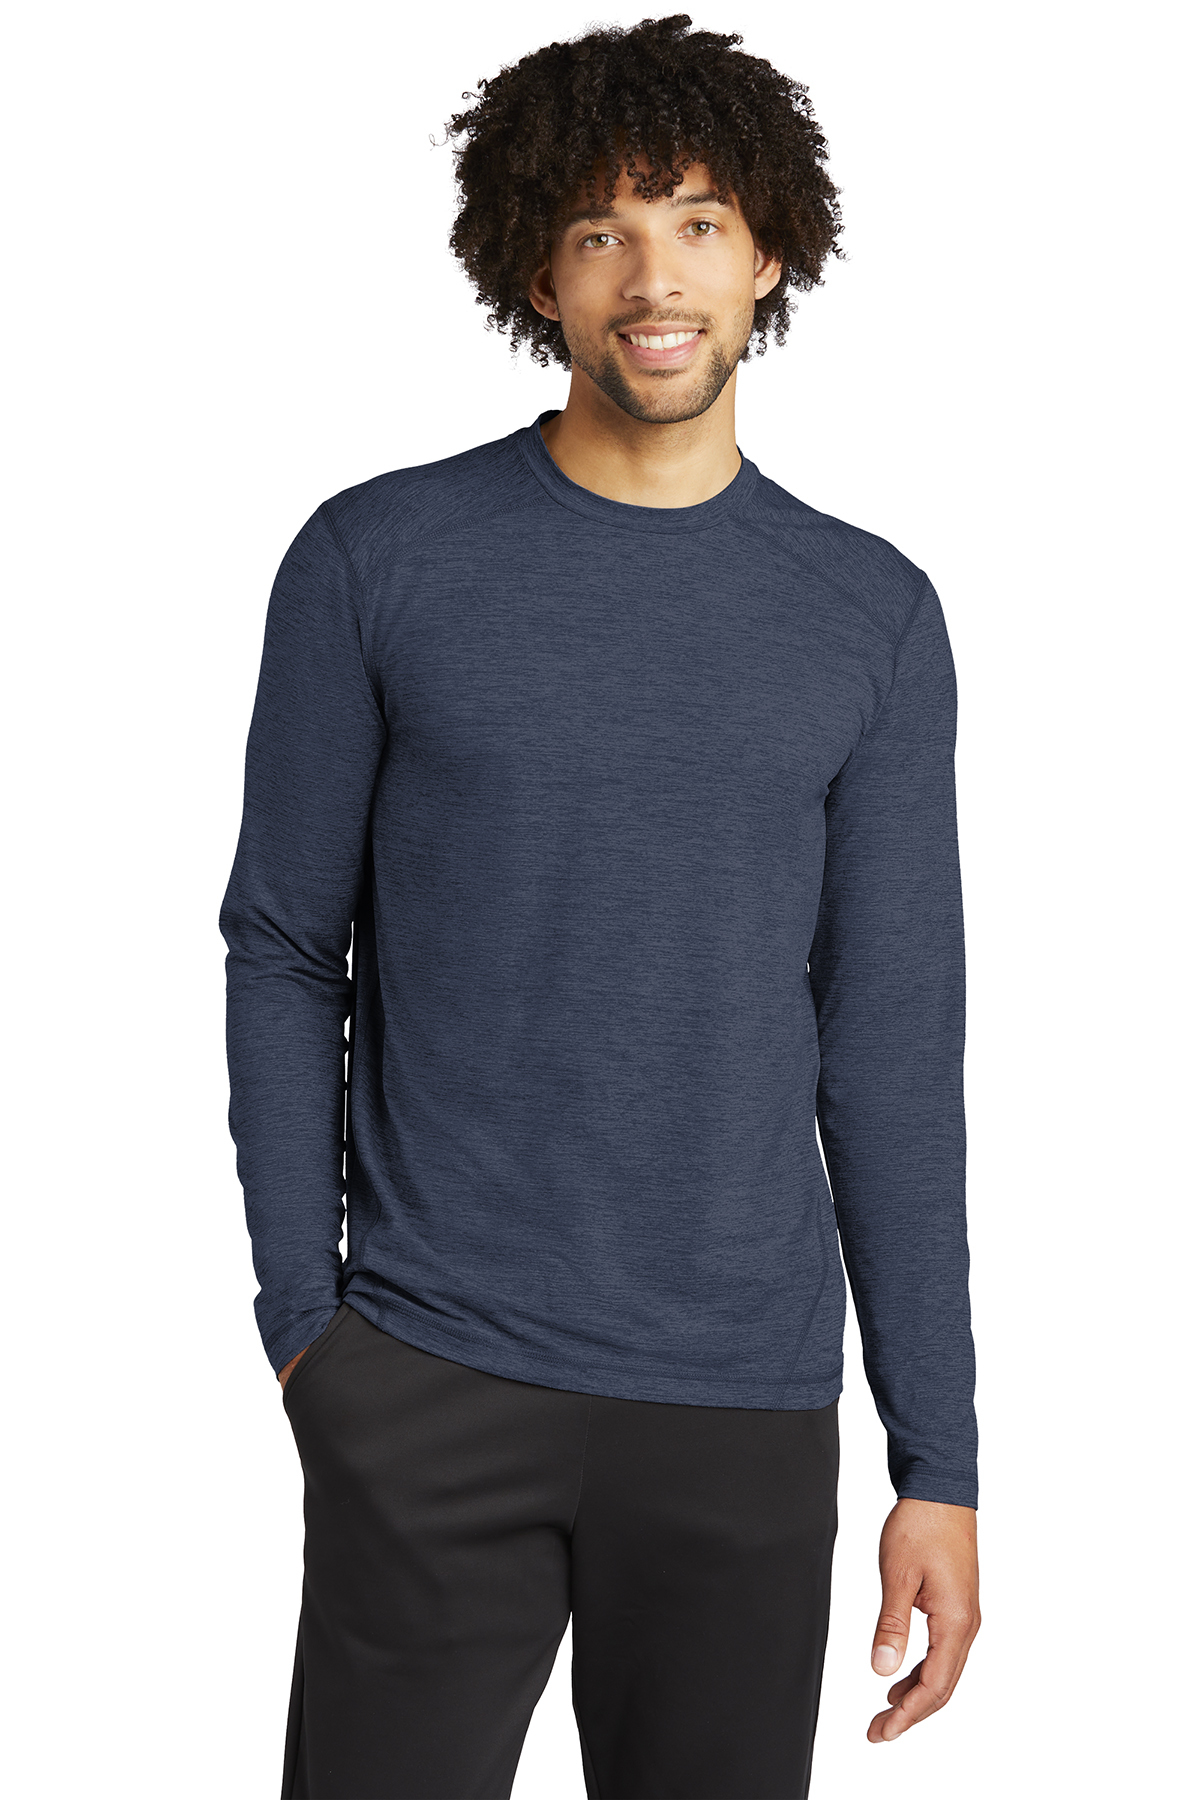 Sport-Tek and Port Authority Long Sleeve T-Shirts at Sport Shirt Outlet